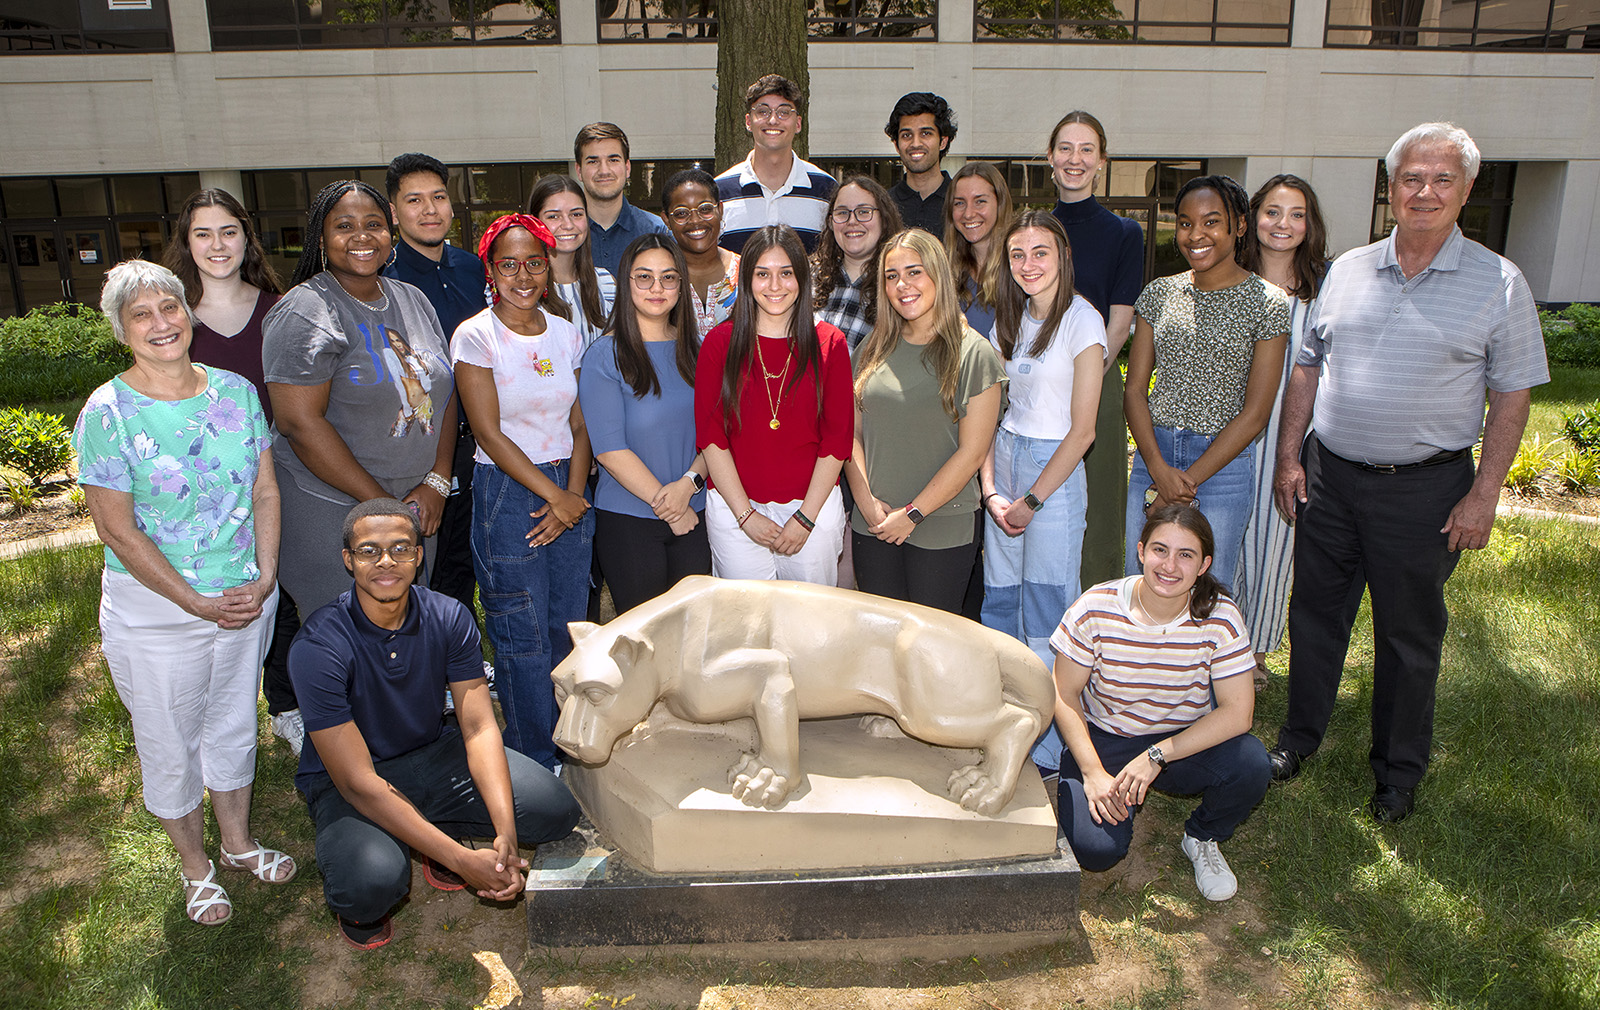 A group of 23 people pose around the Nittany Lion statue in the Penn State College of Medicine courtyard. 